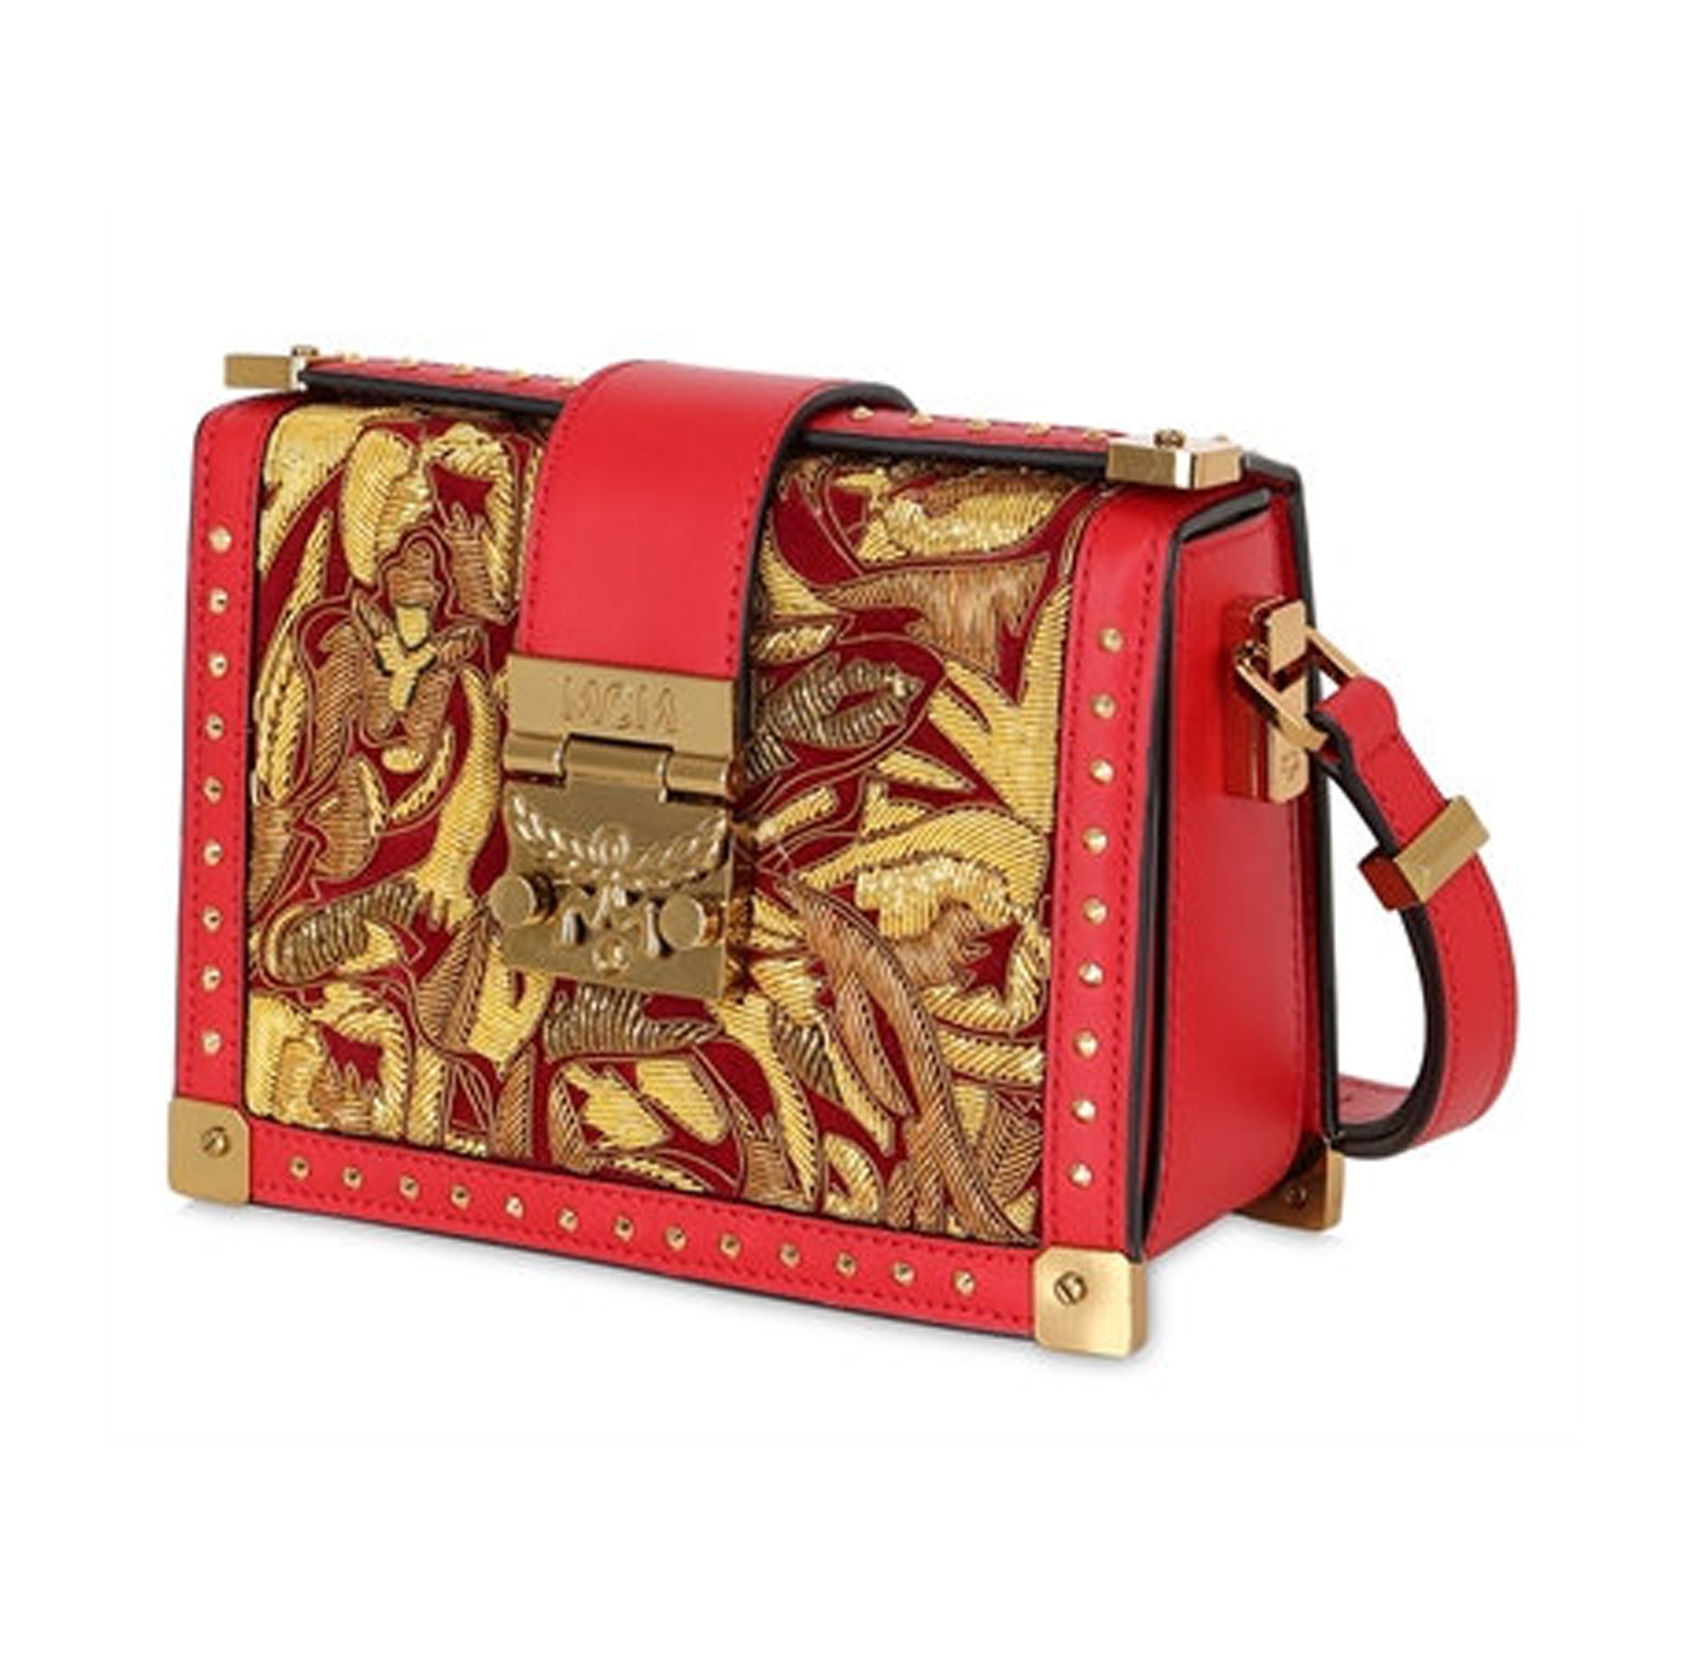 Bag it: 10 bags you need this Chinese New Year | Lifestyle Asia Singapore